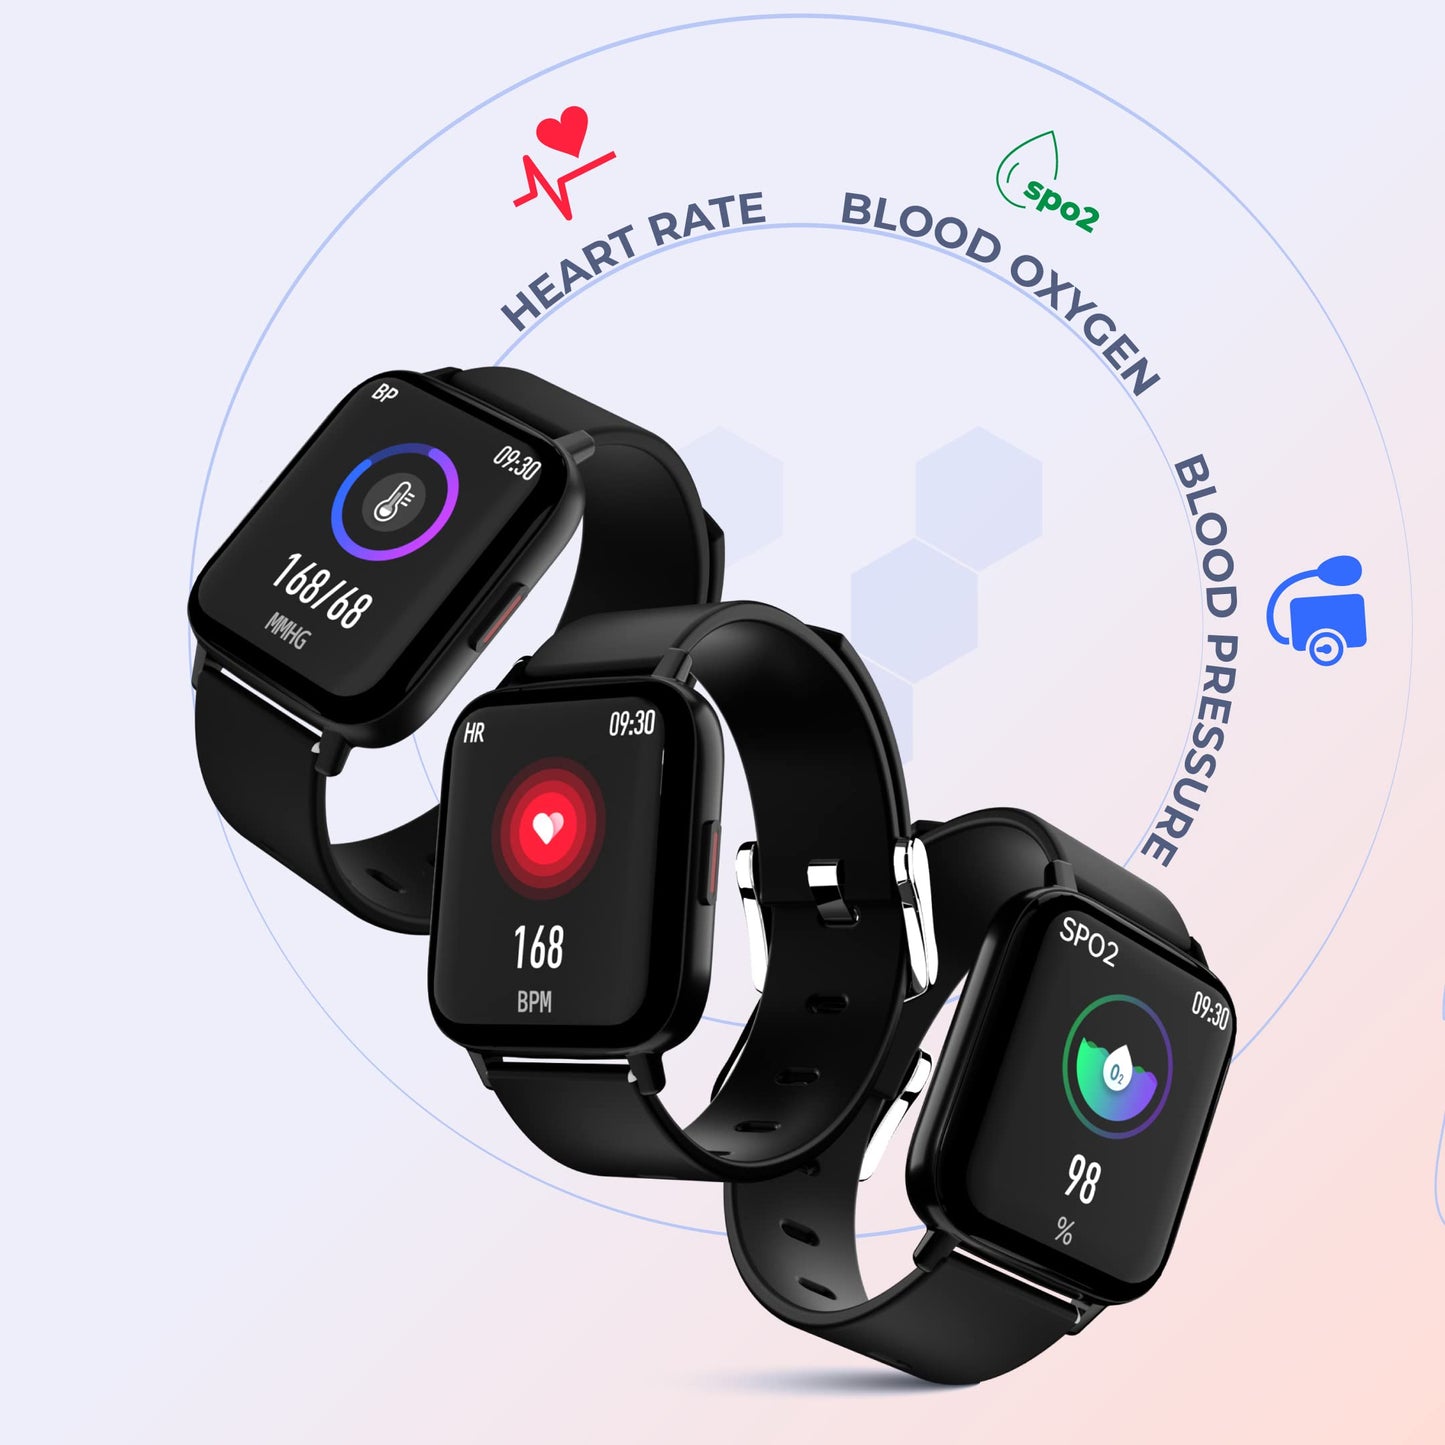 HAMMER Pulse 3.0 Bluetooth Calling Smart Watch with IP67 Rating & 1.69" Large Display with SpO2 Monitoring, Full Touch Screen & Multiple Watch Faces with Camera & Music Control (Black)